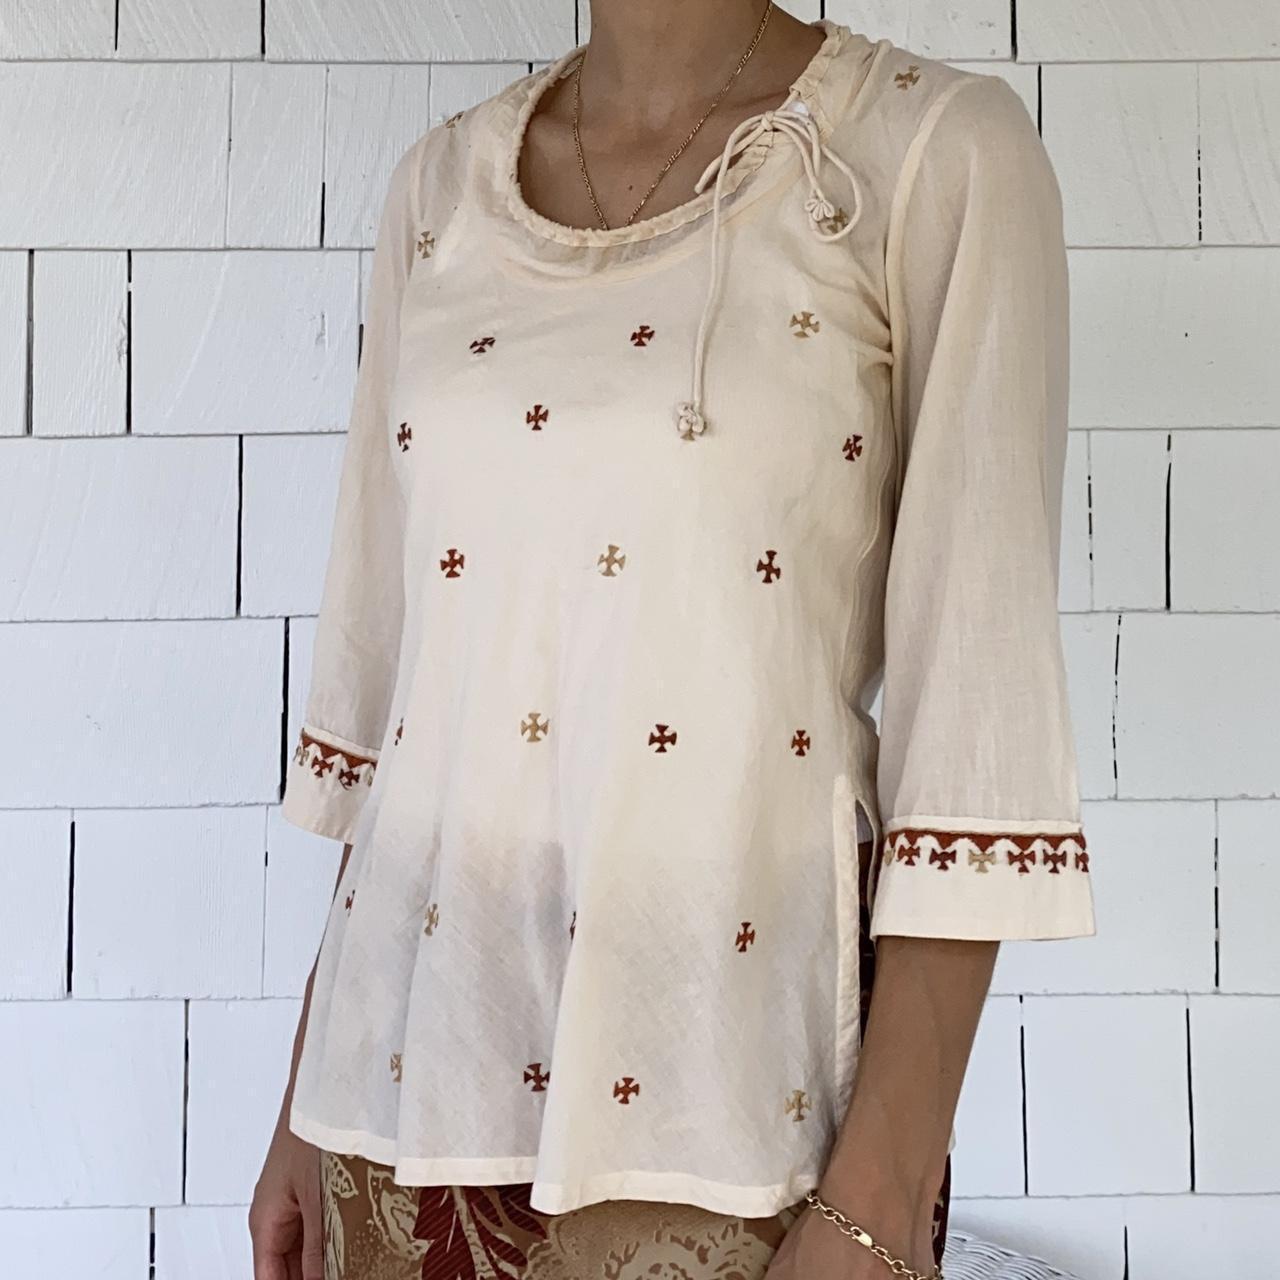 ANOKHI Women's Cream and Brown Blouse (4)